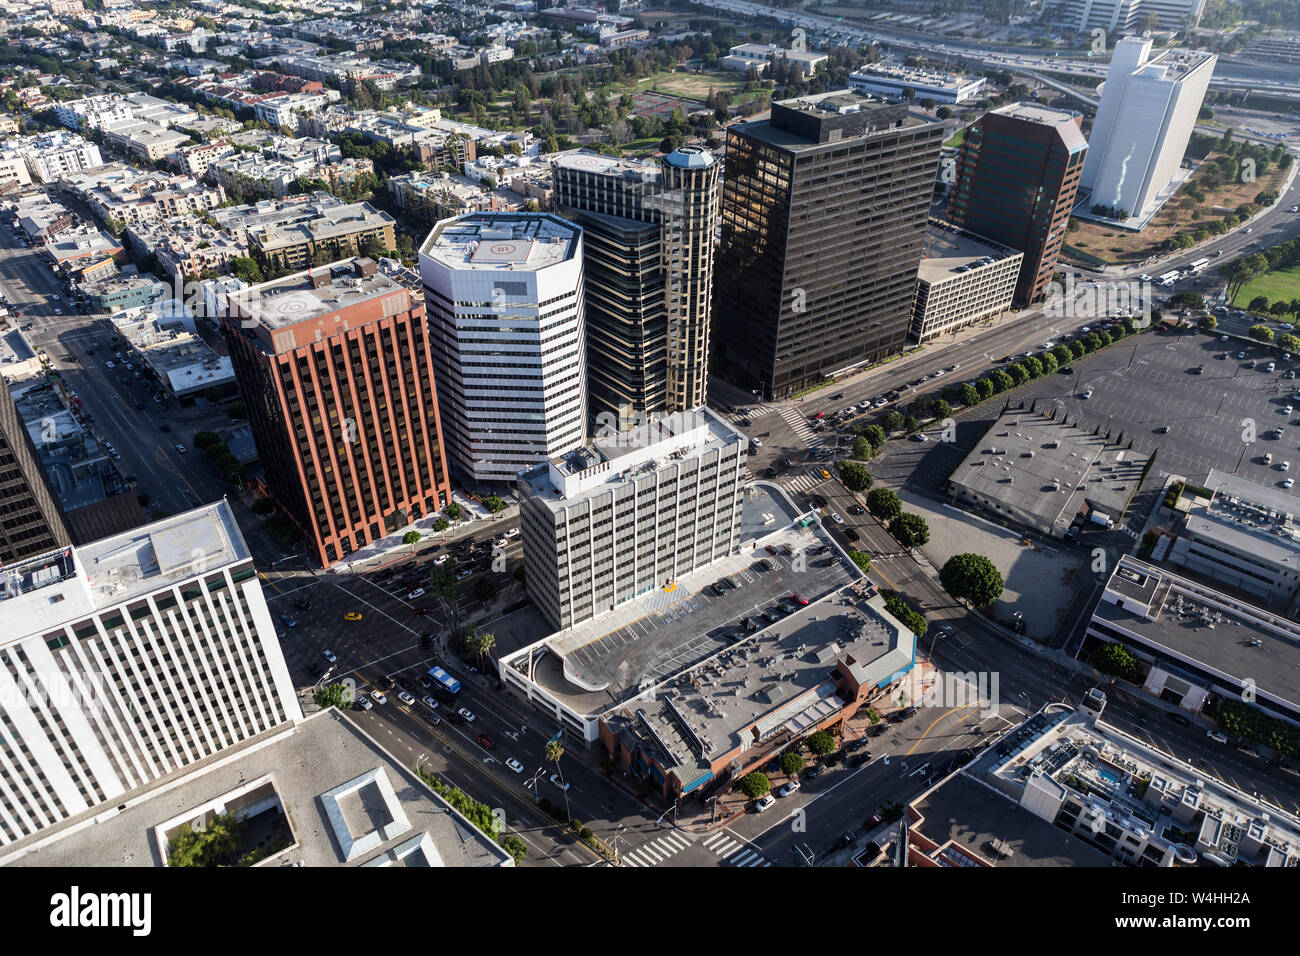 Aerial view of buildings along Wilshire Blvd near Westwood and the 405 freeway in Los Angeles, California. Stock Photo